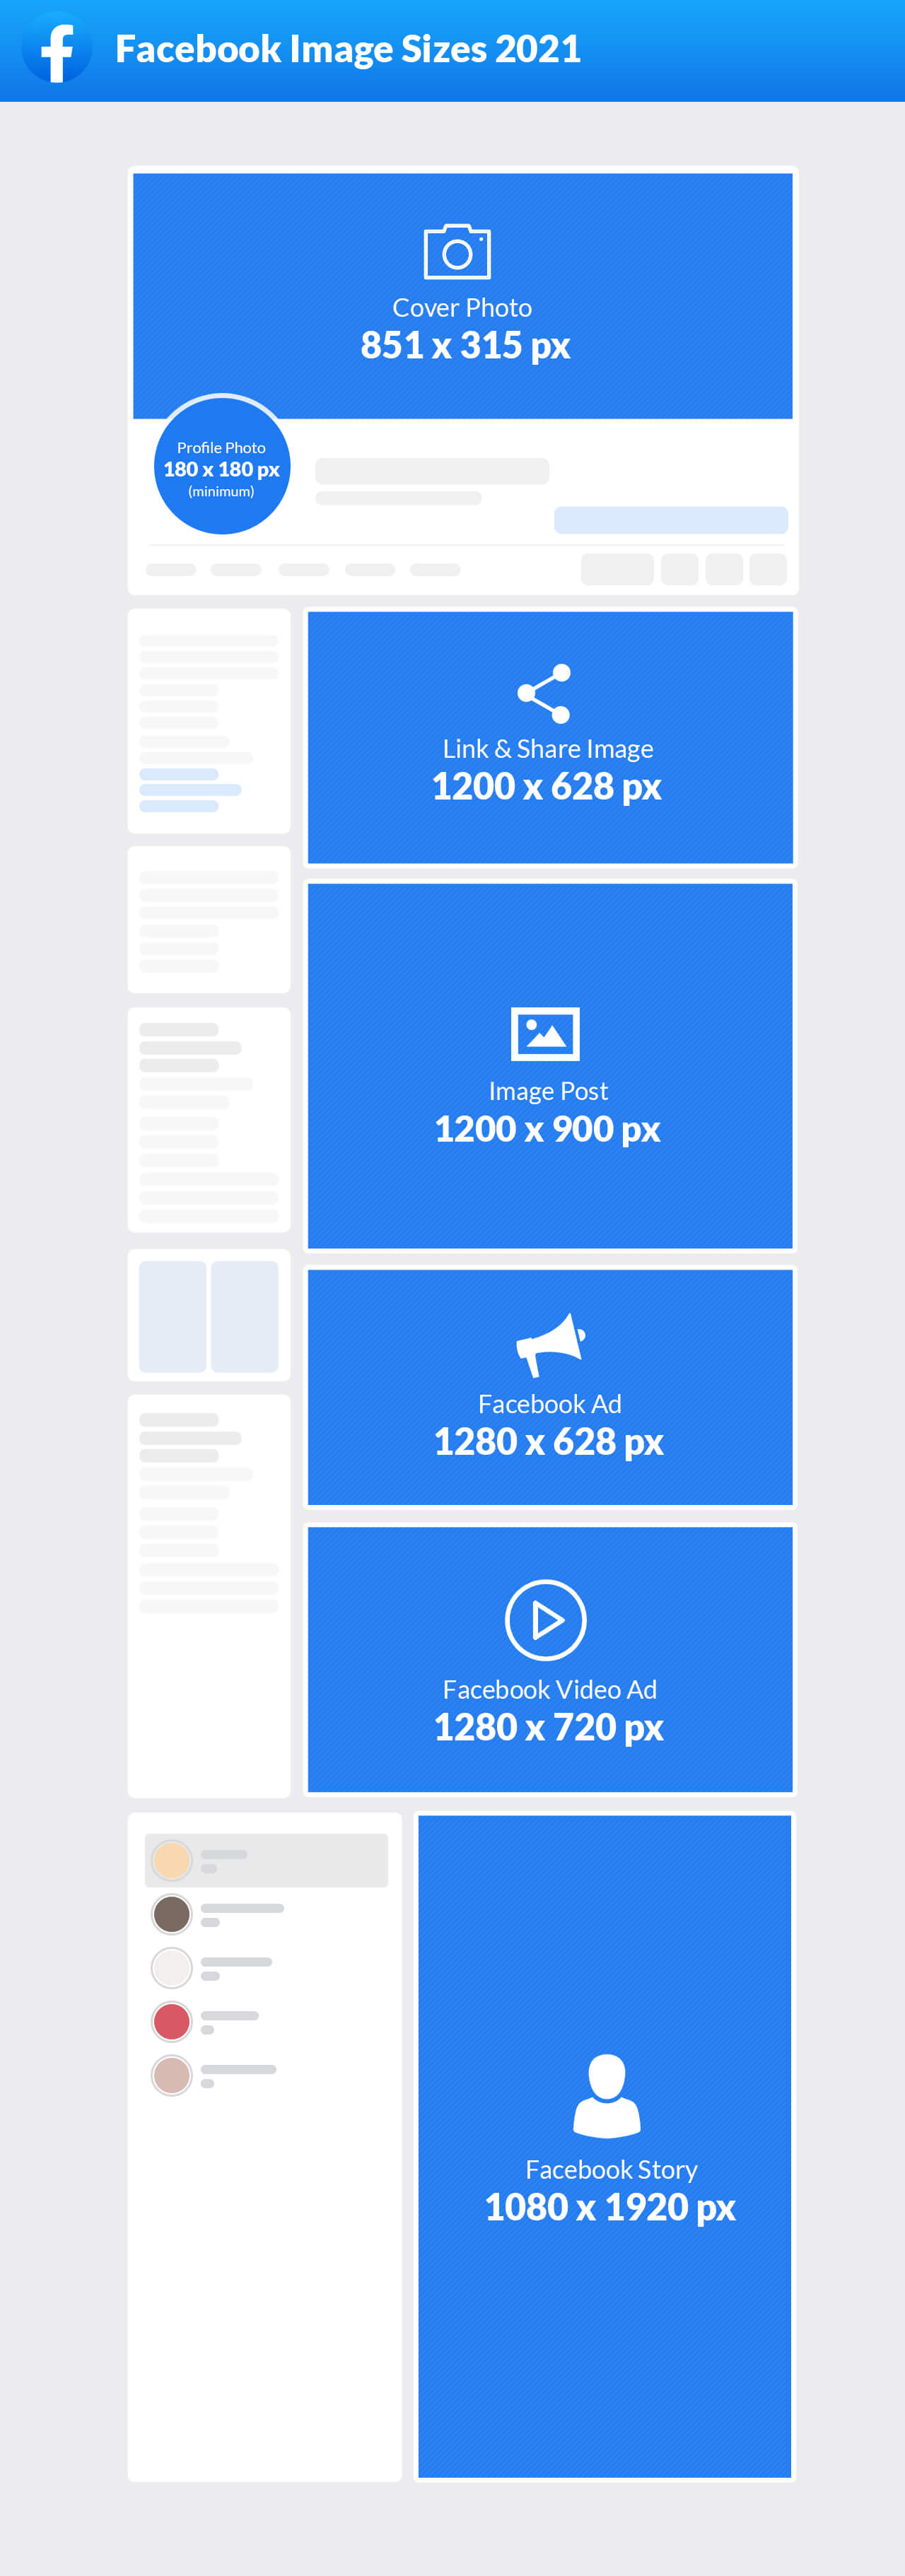 Facebook Image And Video Size Guide For 2021 Mediamodifier The importance of facebook cover photos for businesses. facebook image and video size guide for